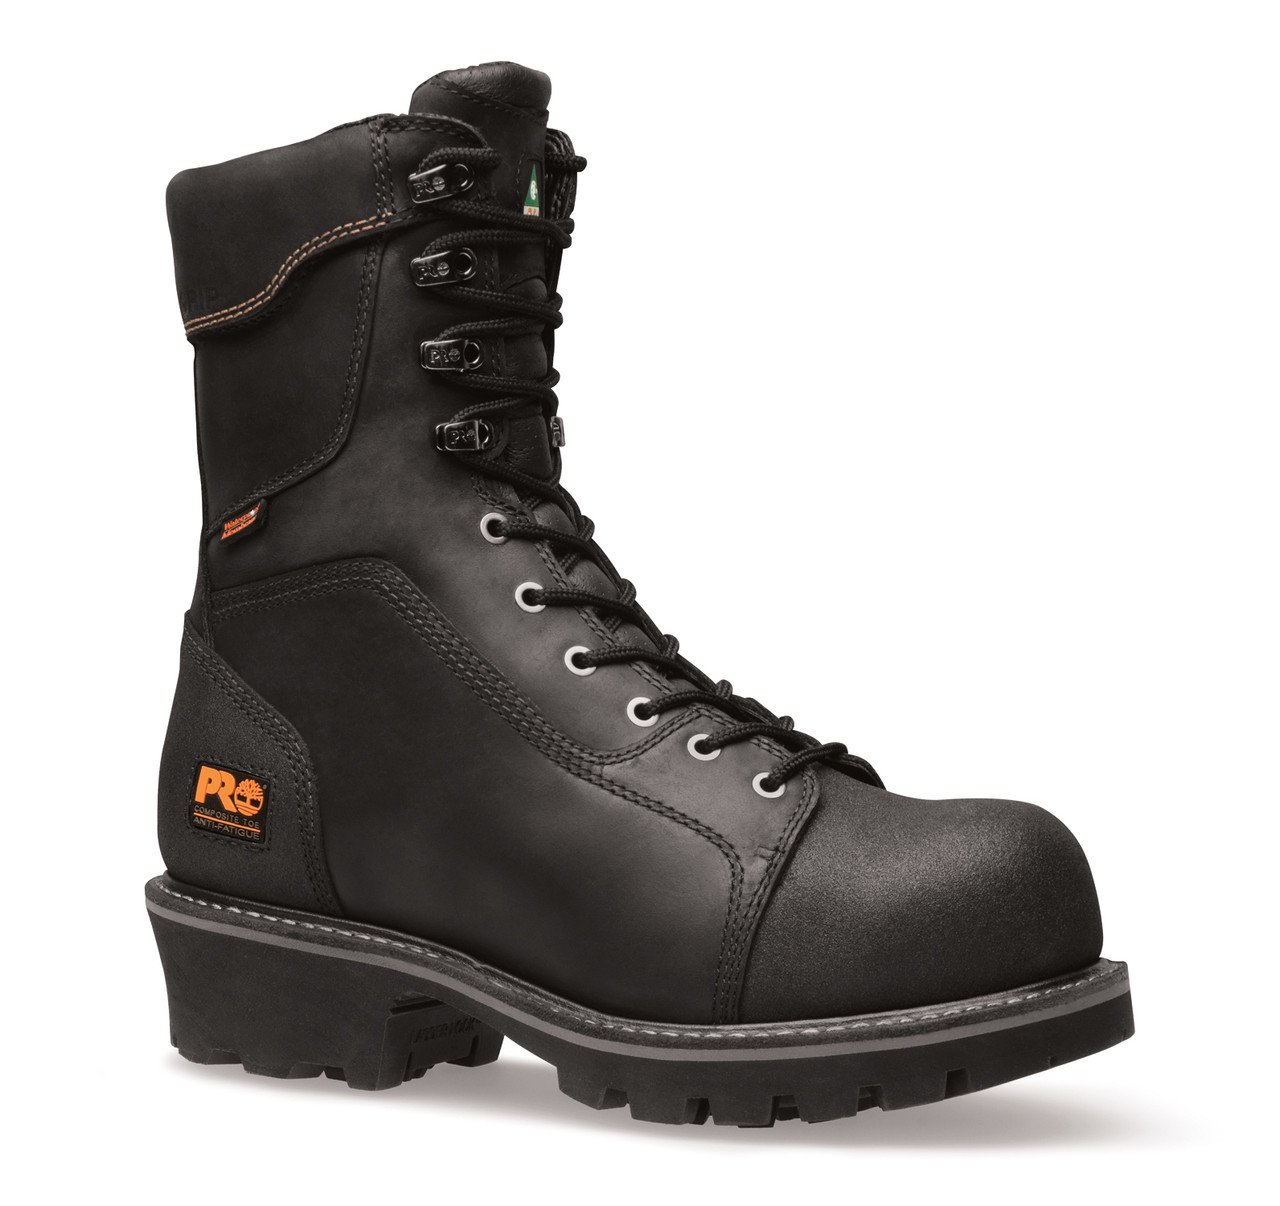 Gering Helaas Prime Timberland PRO® Rip Saw #91614 Men's 9" Waterproof Composite Safety Toe  Logger Work Boot